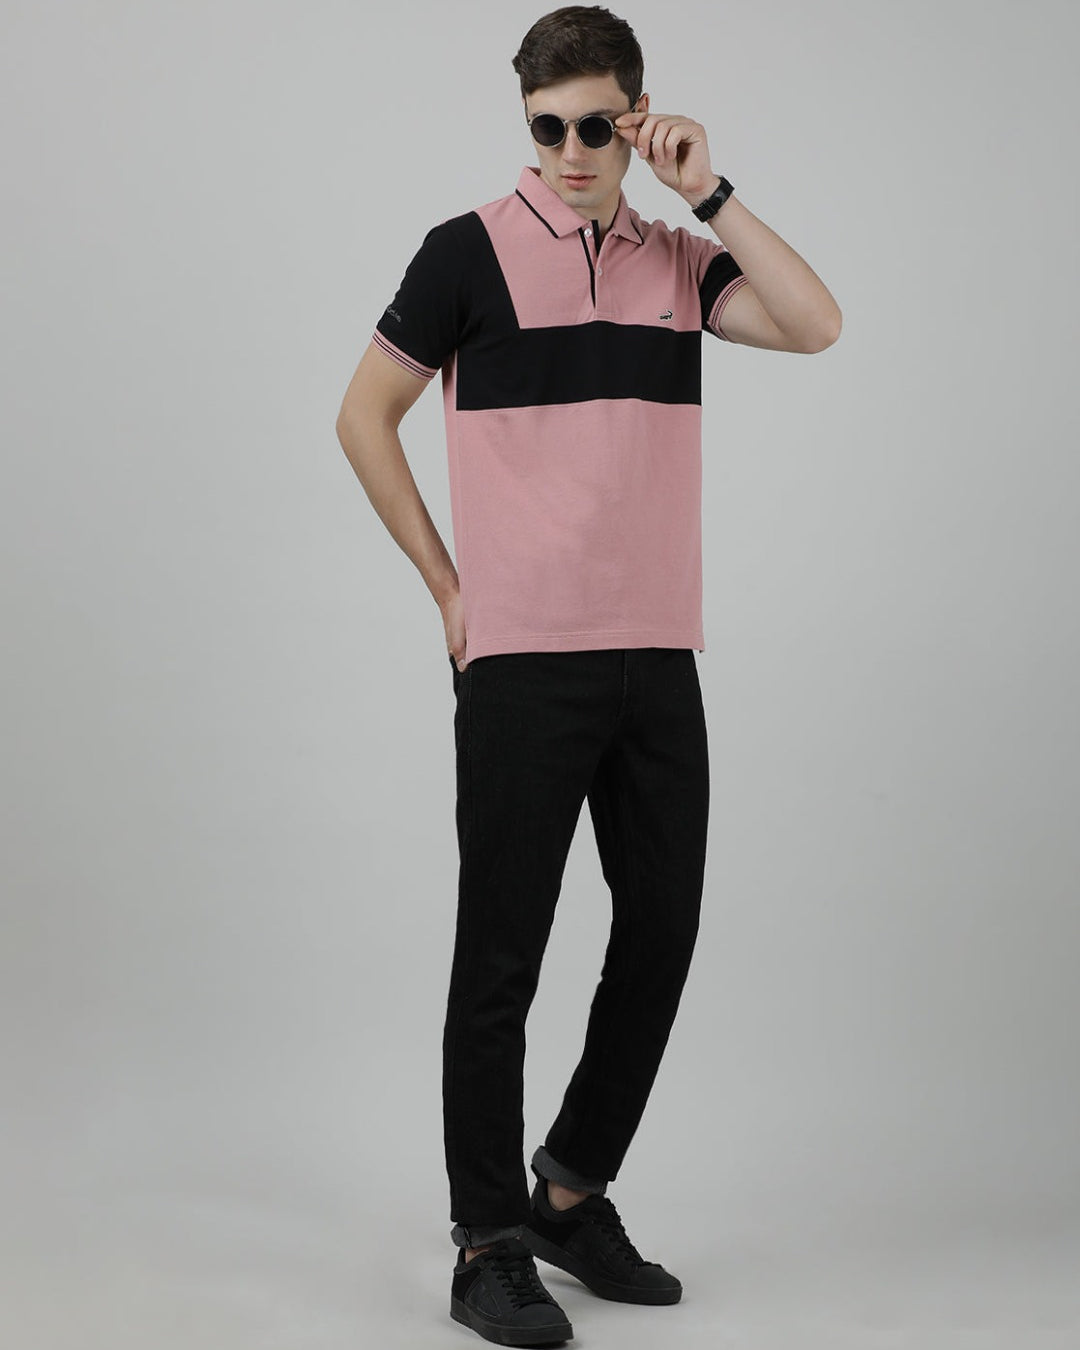 Crocodile Casual Pink T-Shirt Cut and Sew Polo Half Sleeve Slim Fit with Collar for Men